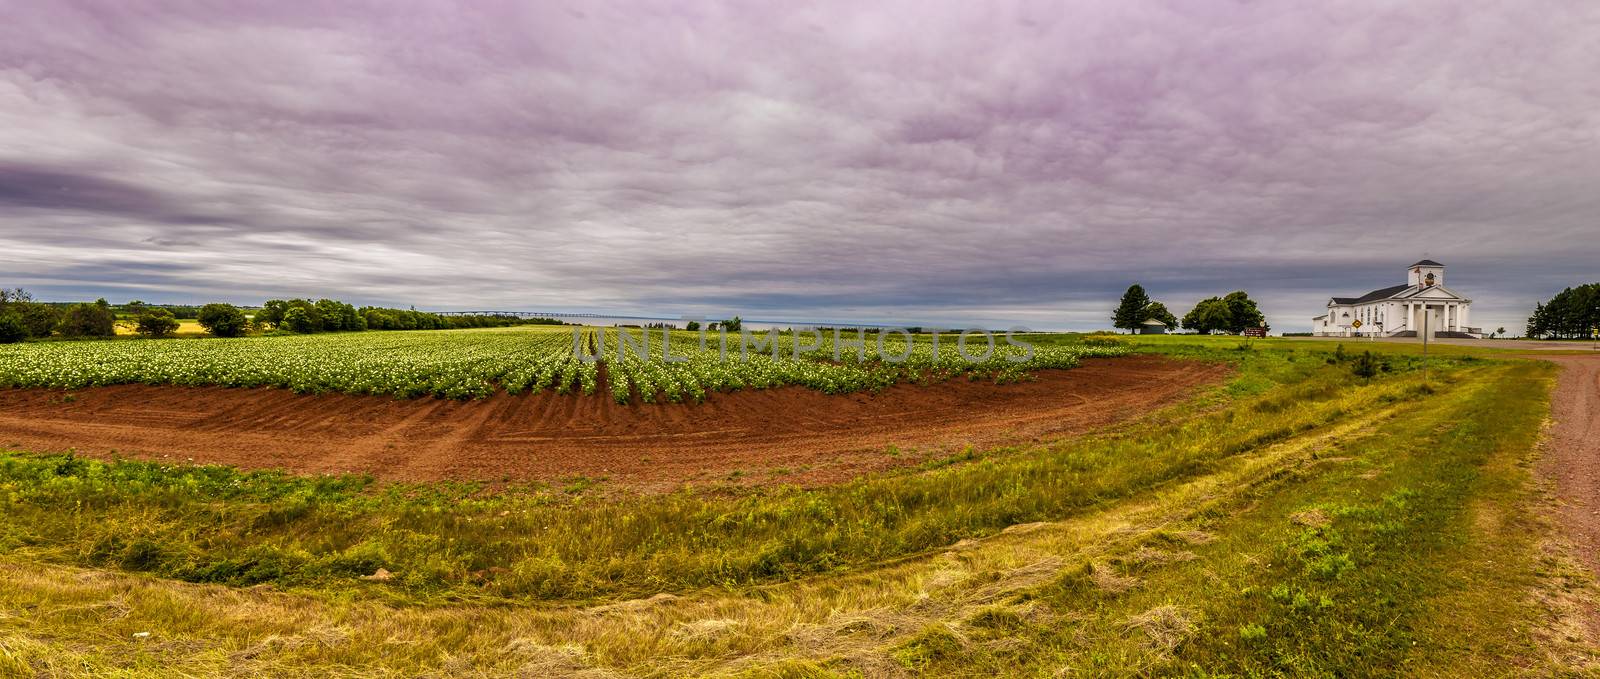 Panoramic hdr country view of a potato field, a church and the cofederation bridge in Prince Edward Island in Canada